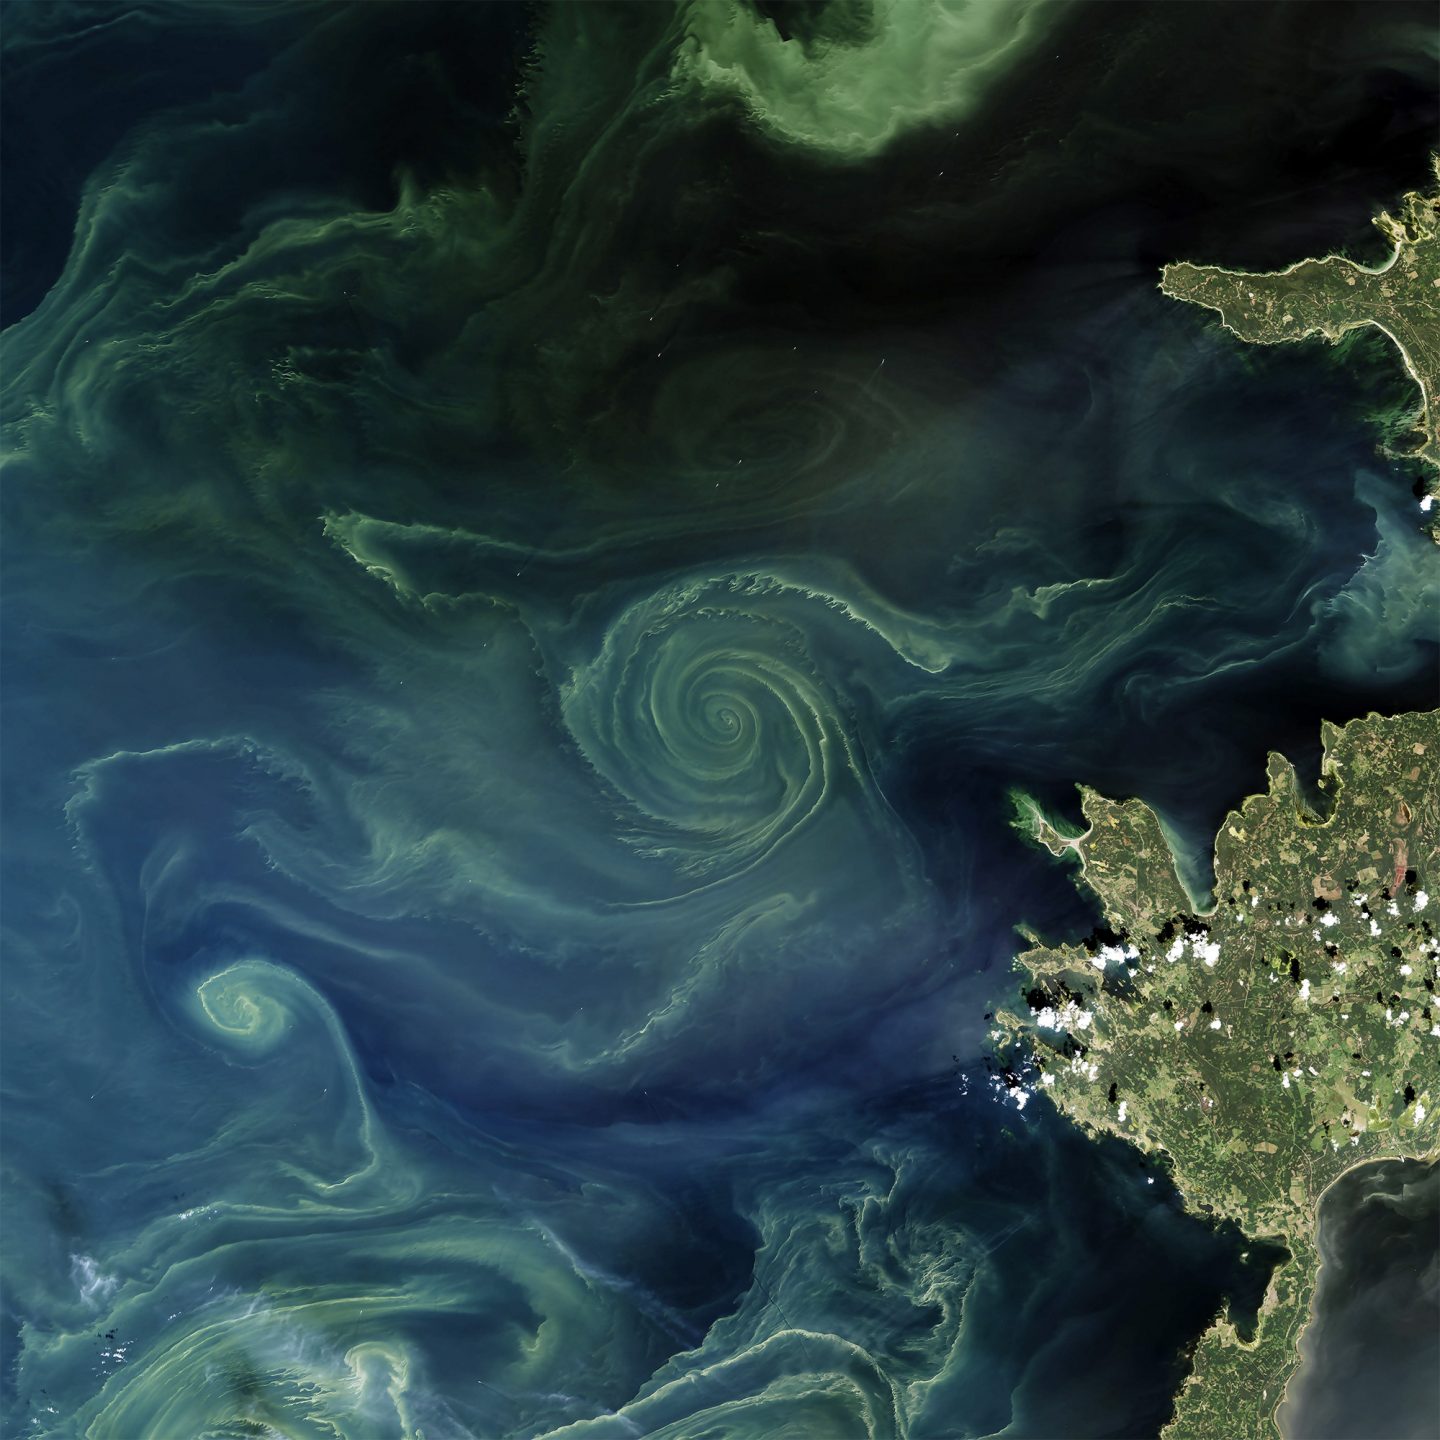 Green phytoplankton trace the outlines of a vortex in the Baltic Sea.